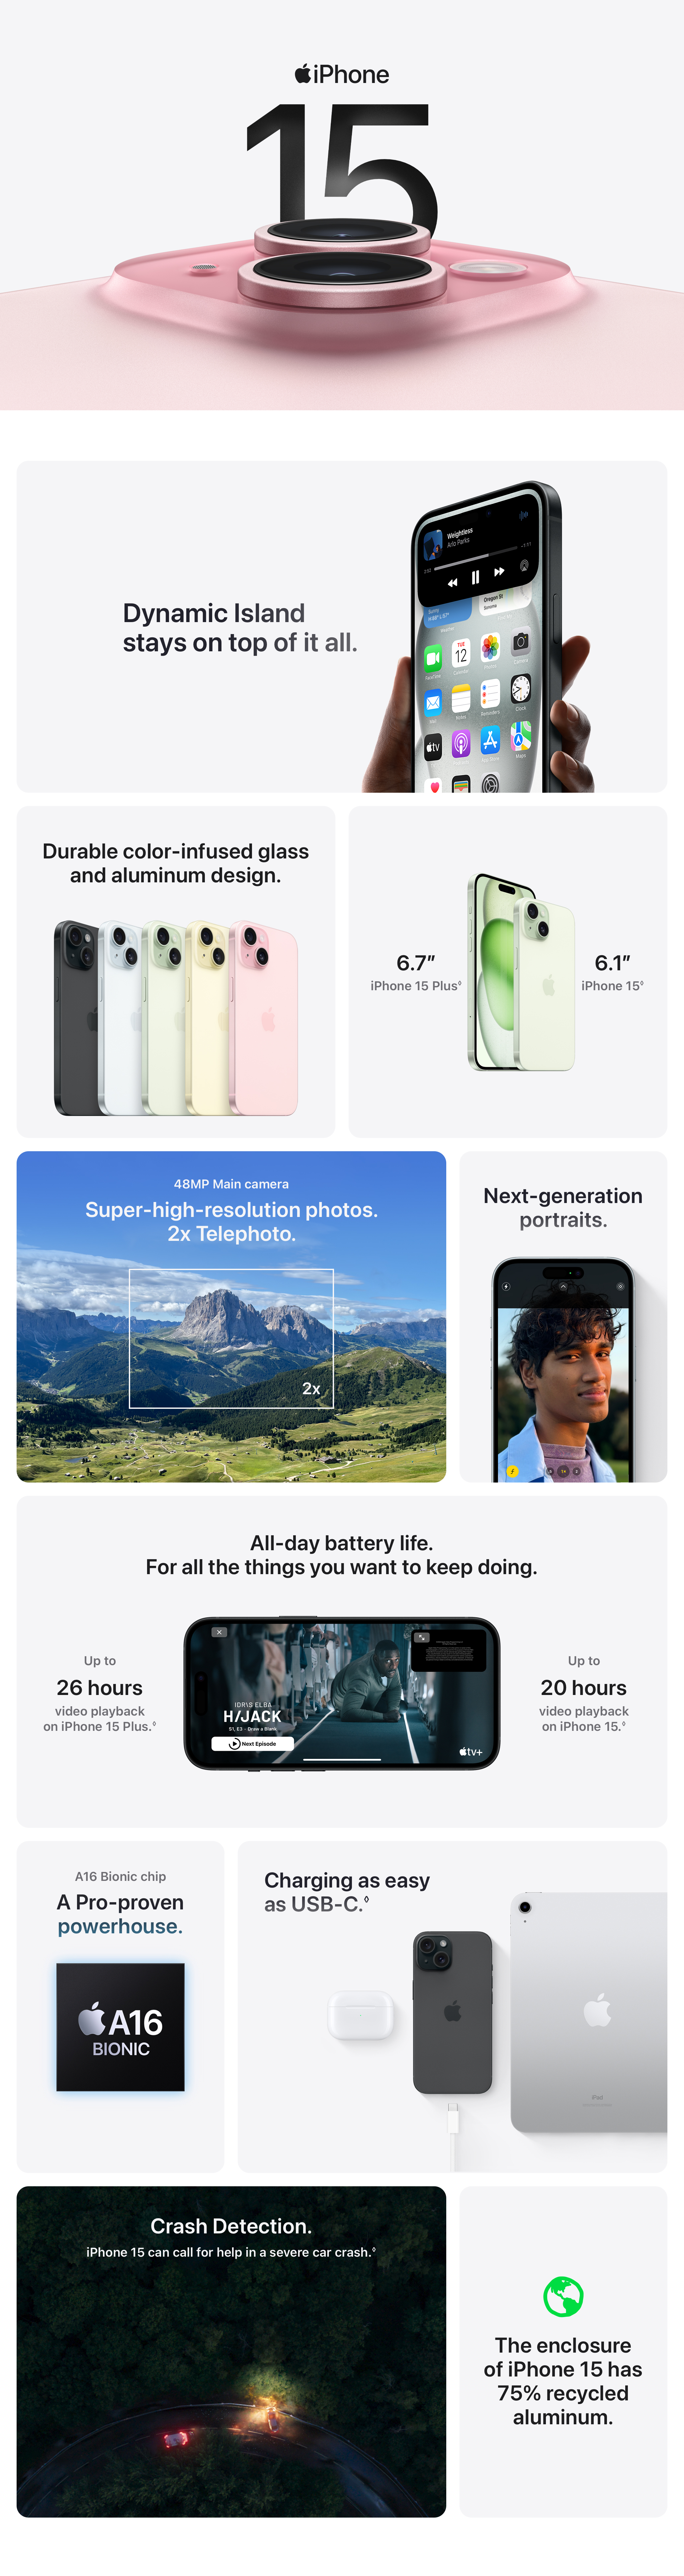 iPhone 15 features